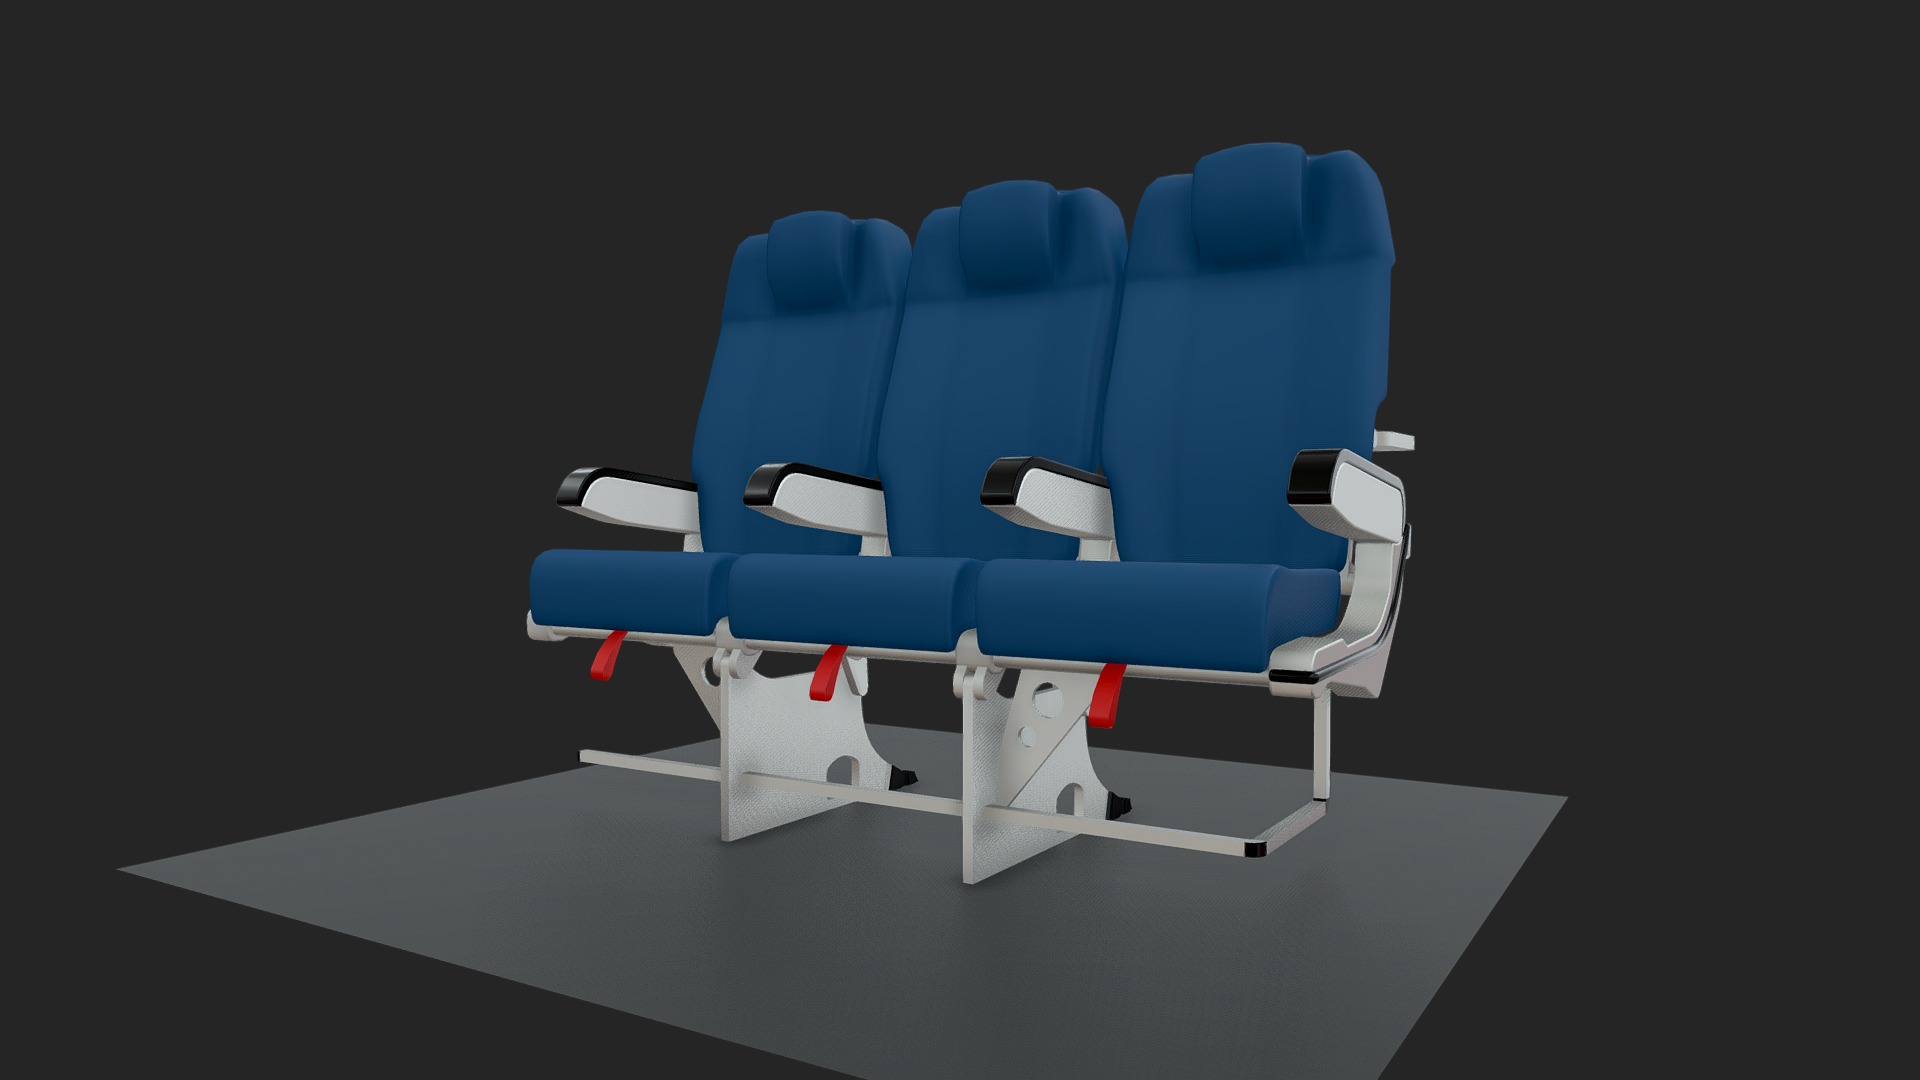 3D model Chairs A320 - This is a 3D model of the Chairs A320. The 3D model is about a group of blue chairs.